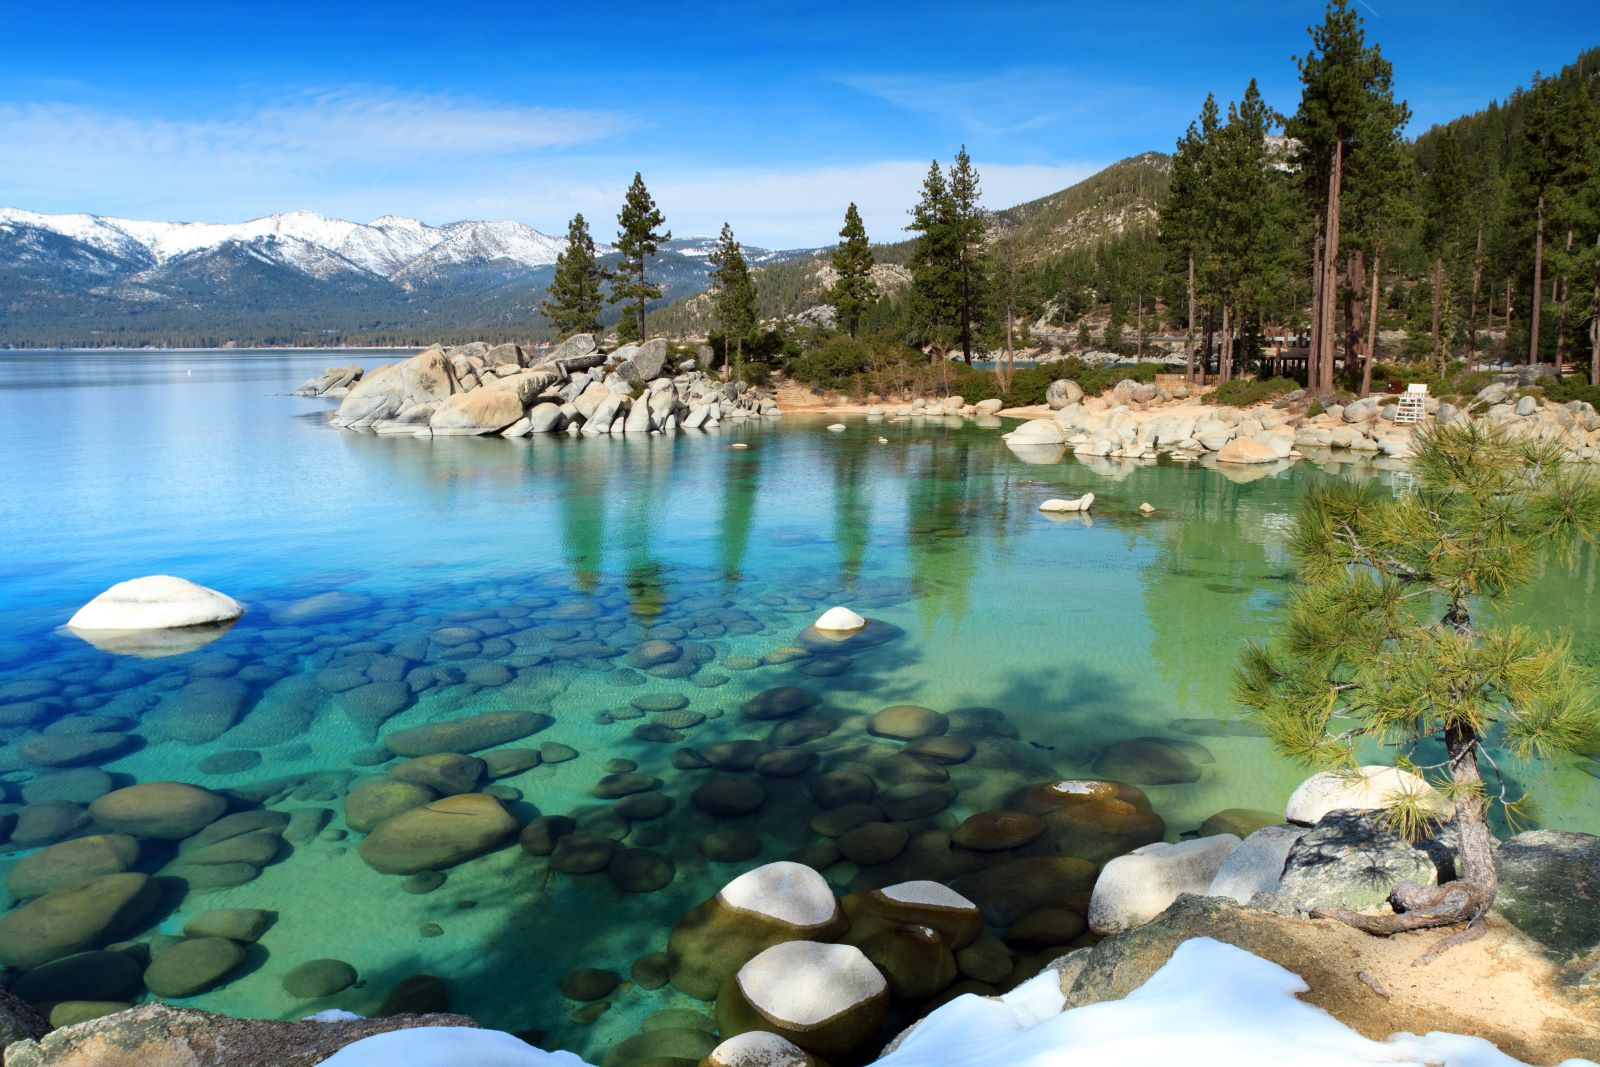 Image credit: Shutterstock / topseller <p>Recommended by a family member, Lake Tahoe is known for its clear waters and beautiful landscapes. It’s a great spot for water sports and hiking. Budget Tip: Visit during the shoulder seasons in late spring or early fall for the best deals on accommodations.</p>